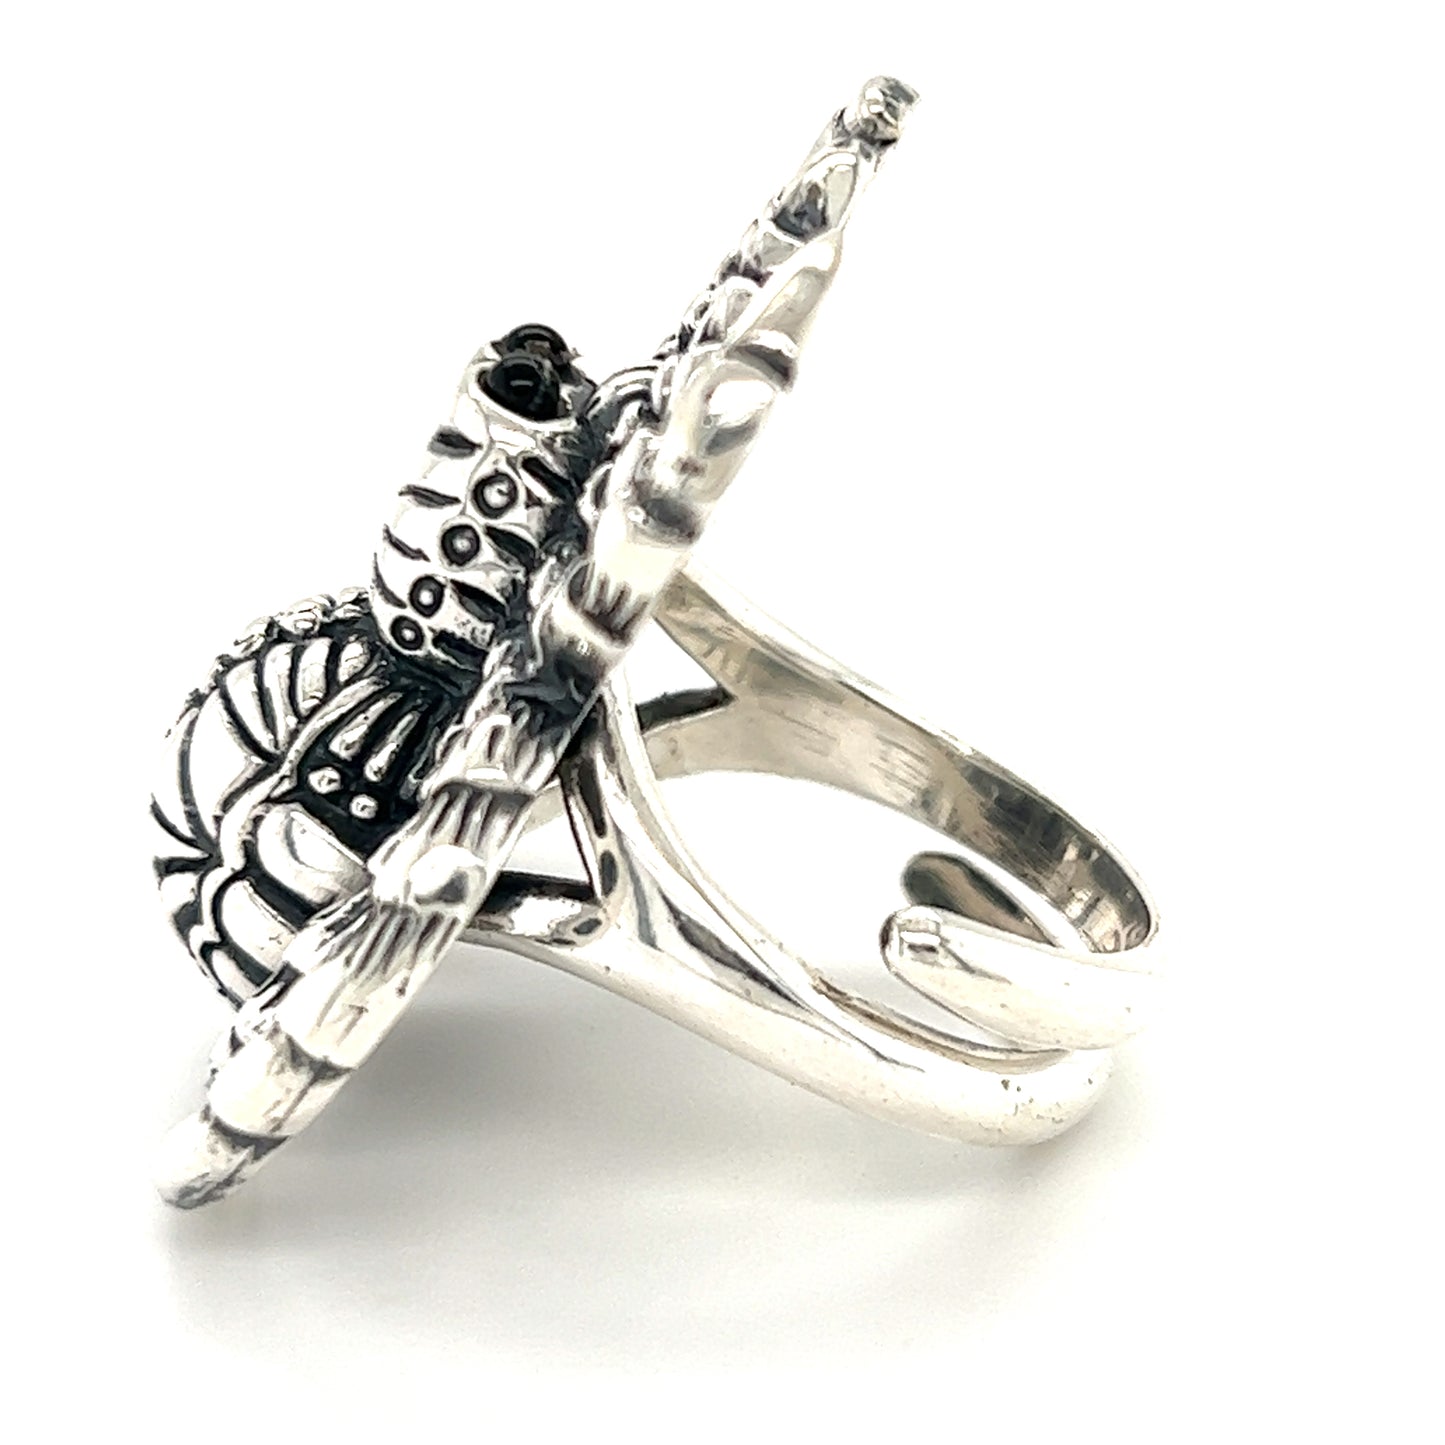 An artisan-crafted Hauntingly Powerful Spider Ring with a gothic detailed spider